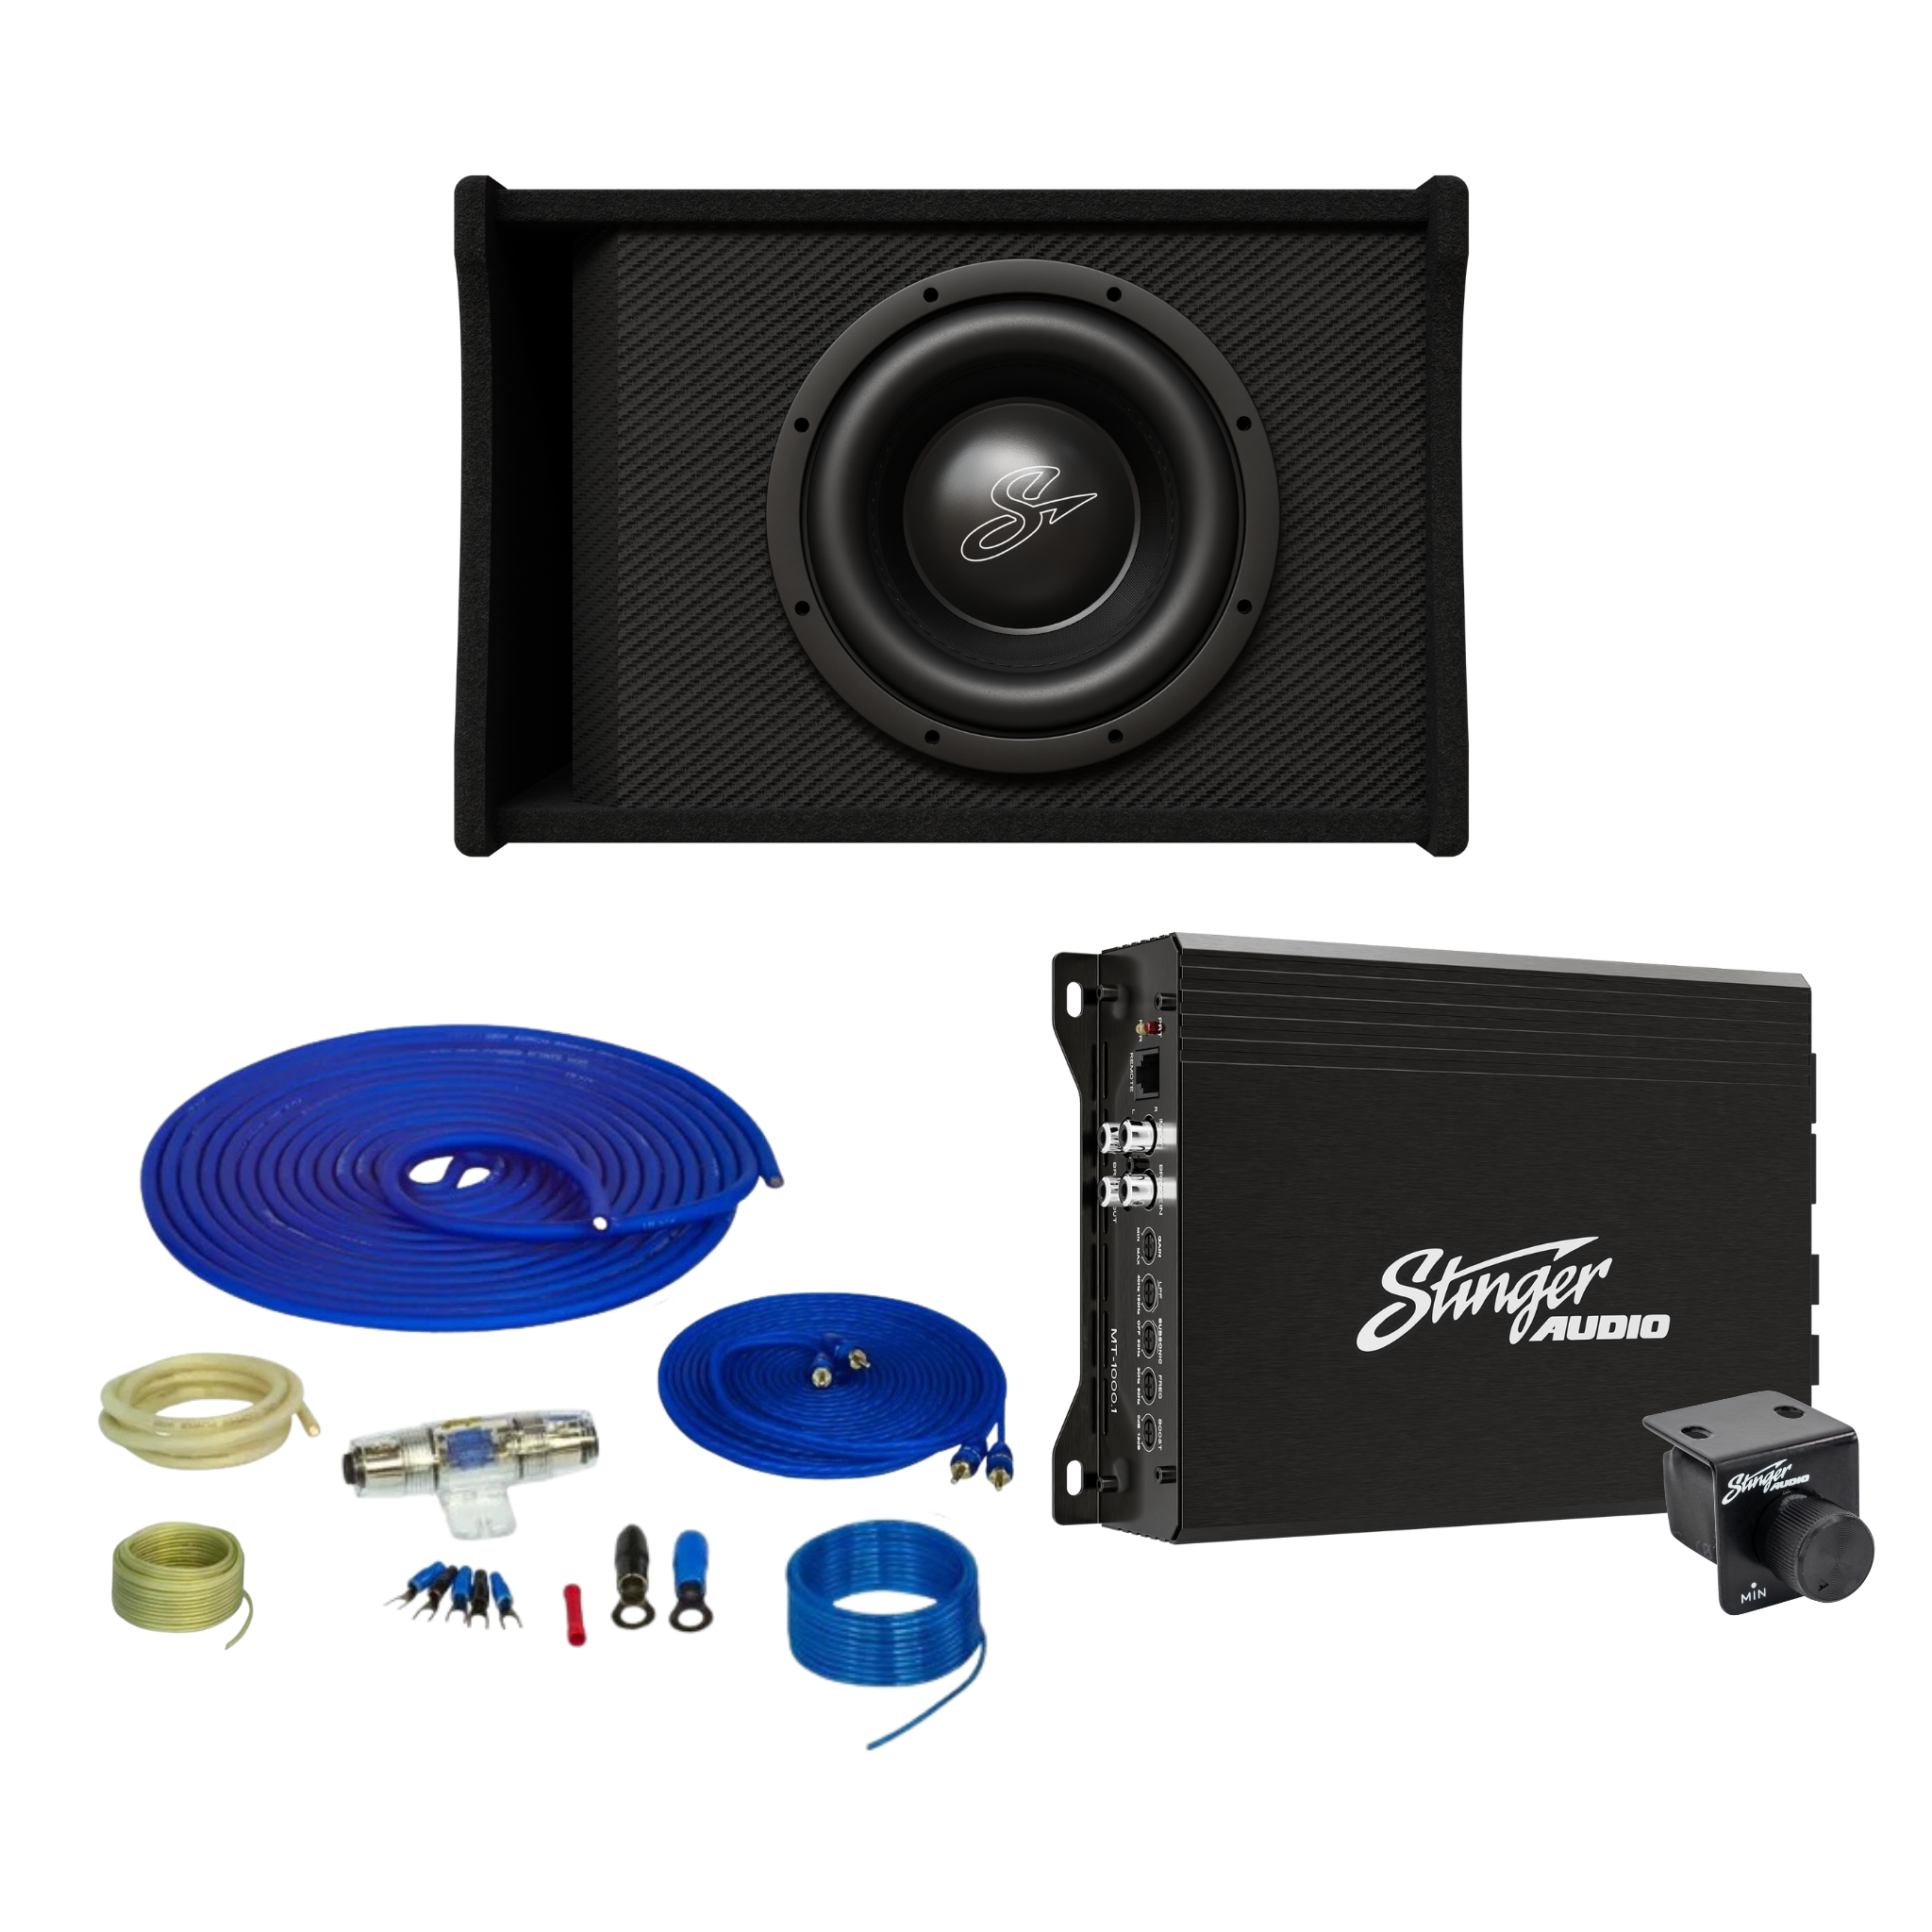 Stinger Off-Road Single 12" 1,000 Watt (RMS) Loaded Ported Subwoofer Enclosure (1,000 Watts RMS/1,500 Watts Max) Bass Package with Amplifier & Complete Wiring Kit